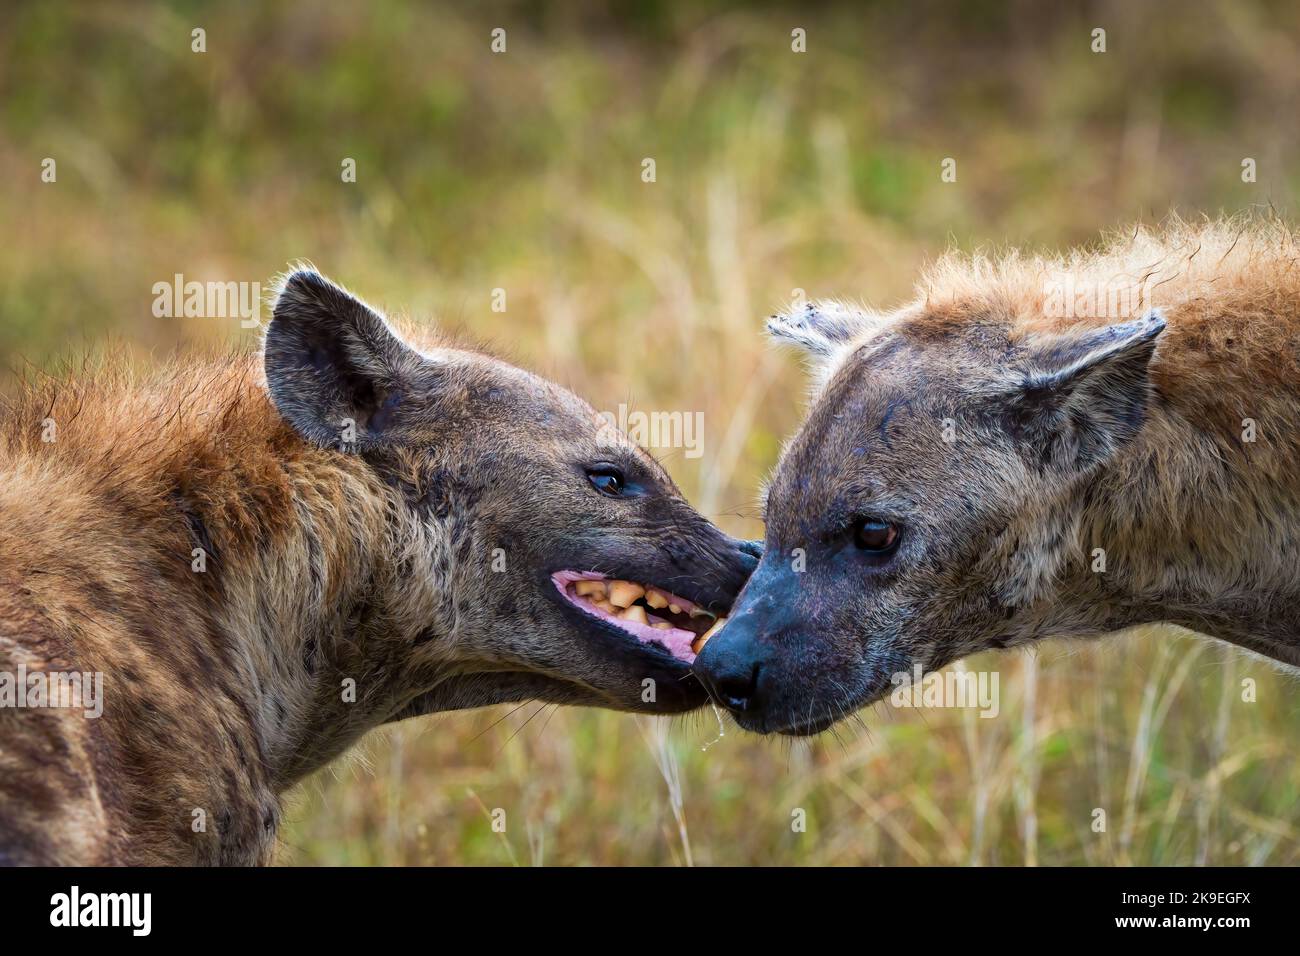 Spotted hyena or laughing hyena (Crocuta crocuta) showing submissive behaviour by flattening the ears and showing teeth. Mpumalanga. South Africa. Stock Photo